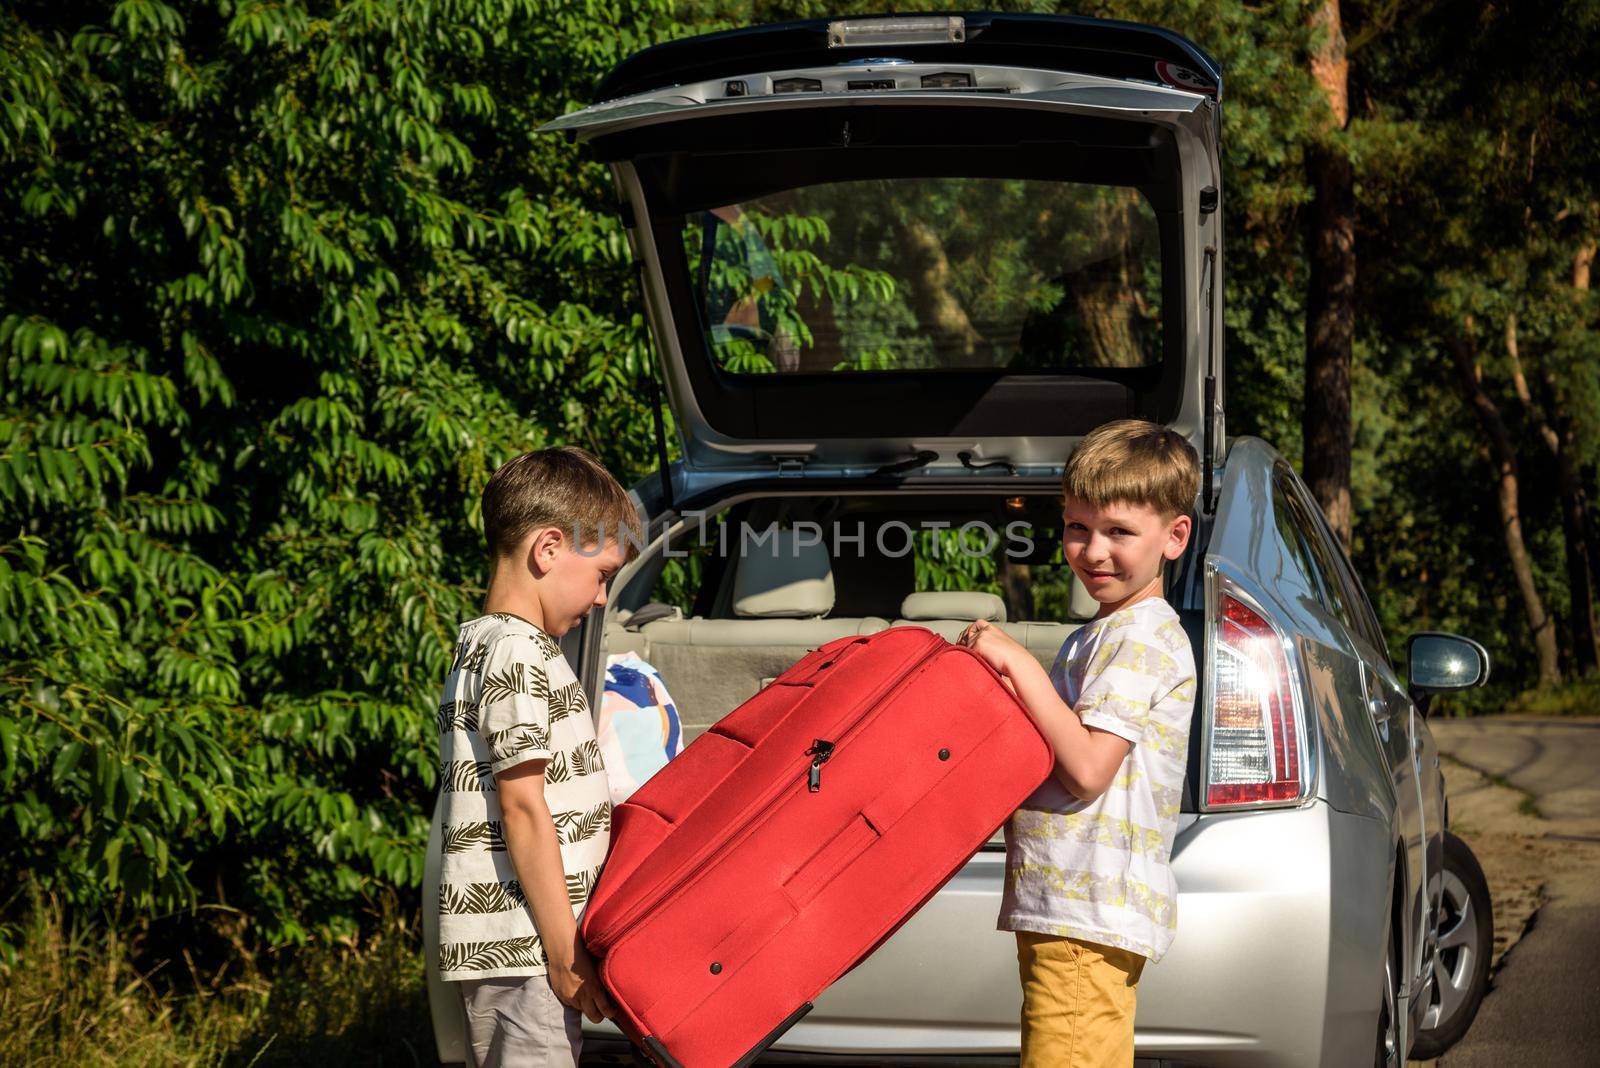 Two adorable boys holding a suitcase going on vacations with their parents. Two kids looking forward for a road trip or travel. Family travel by car.